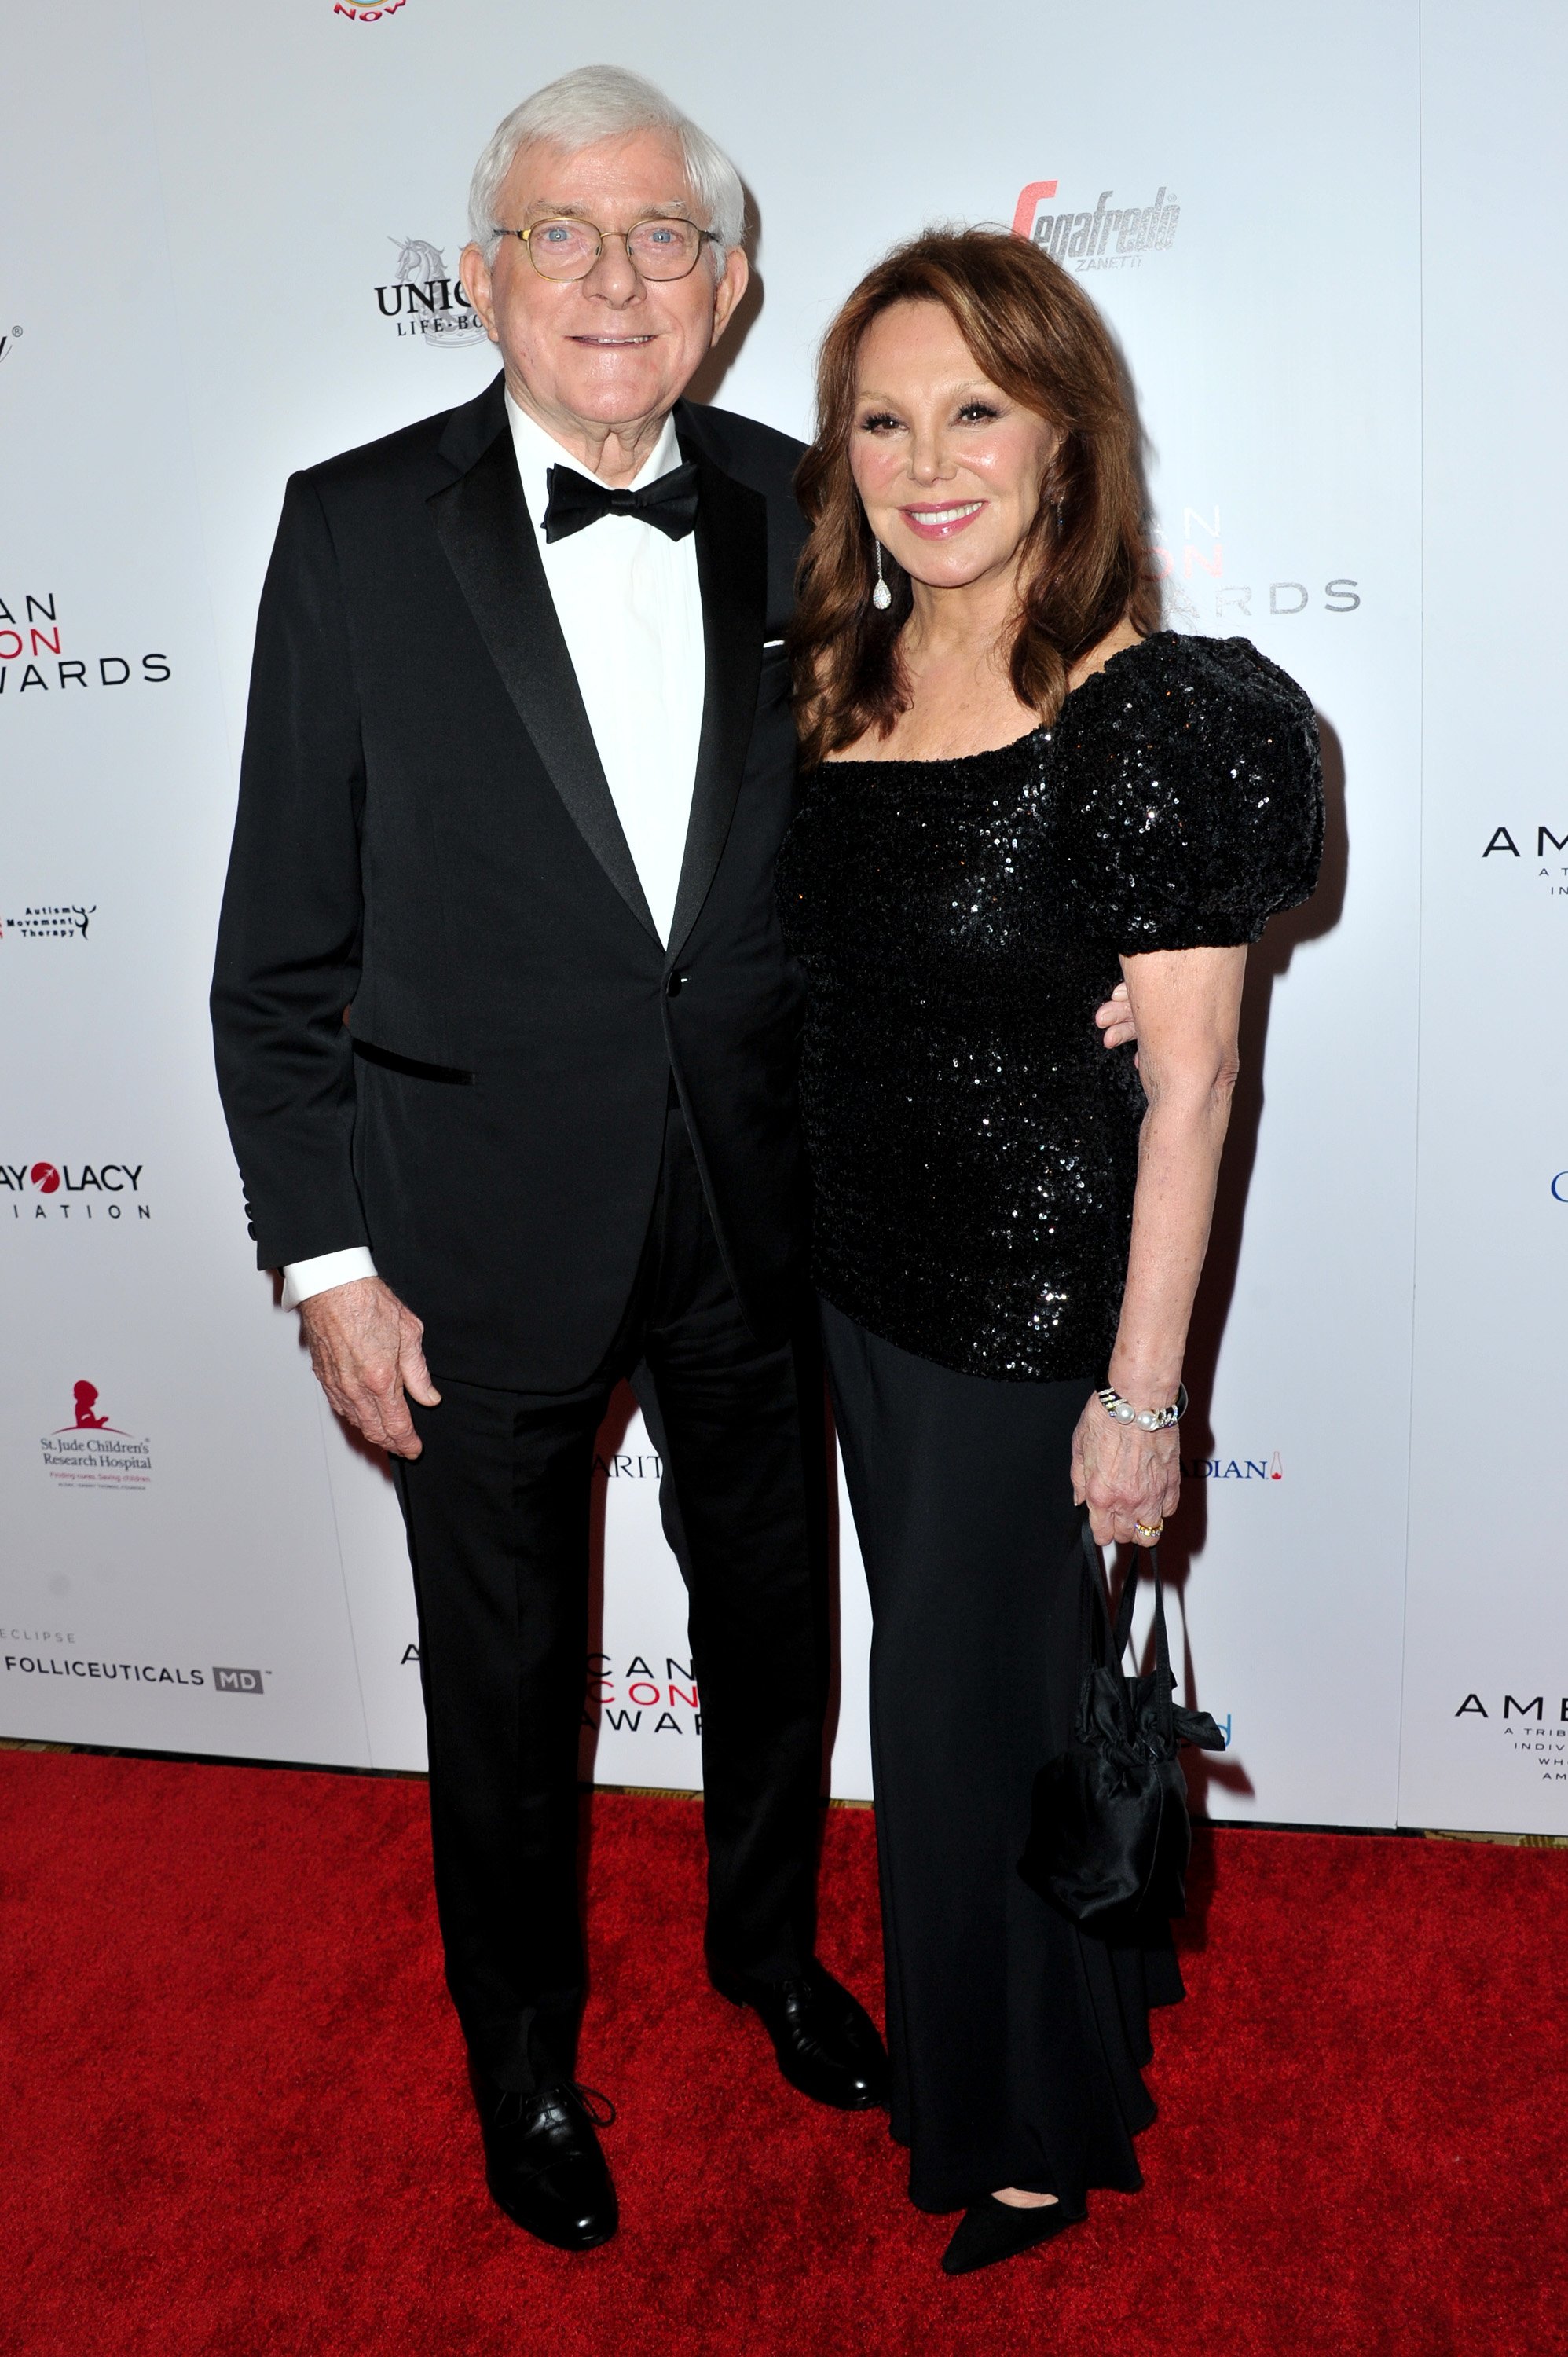 Phil Donahue and Marlo Thomas attend the American Icon Awards at the Beverly Wilshire Four Seasons Hotel on May 19, 2019  | Photo: GettyImages